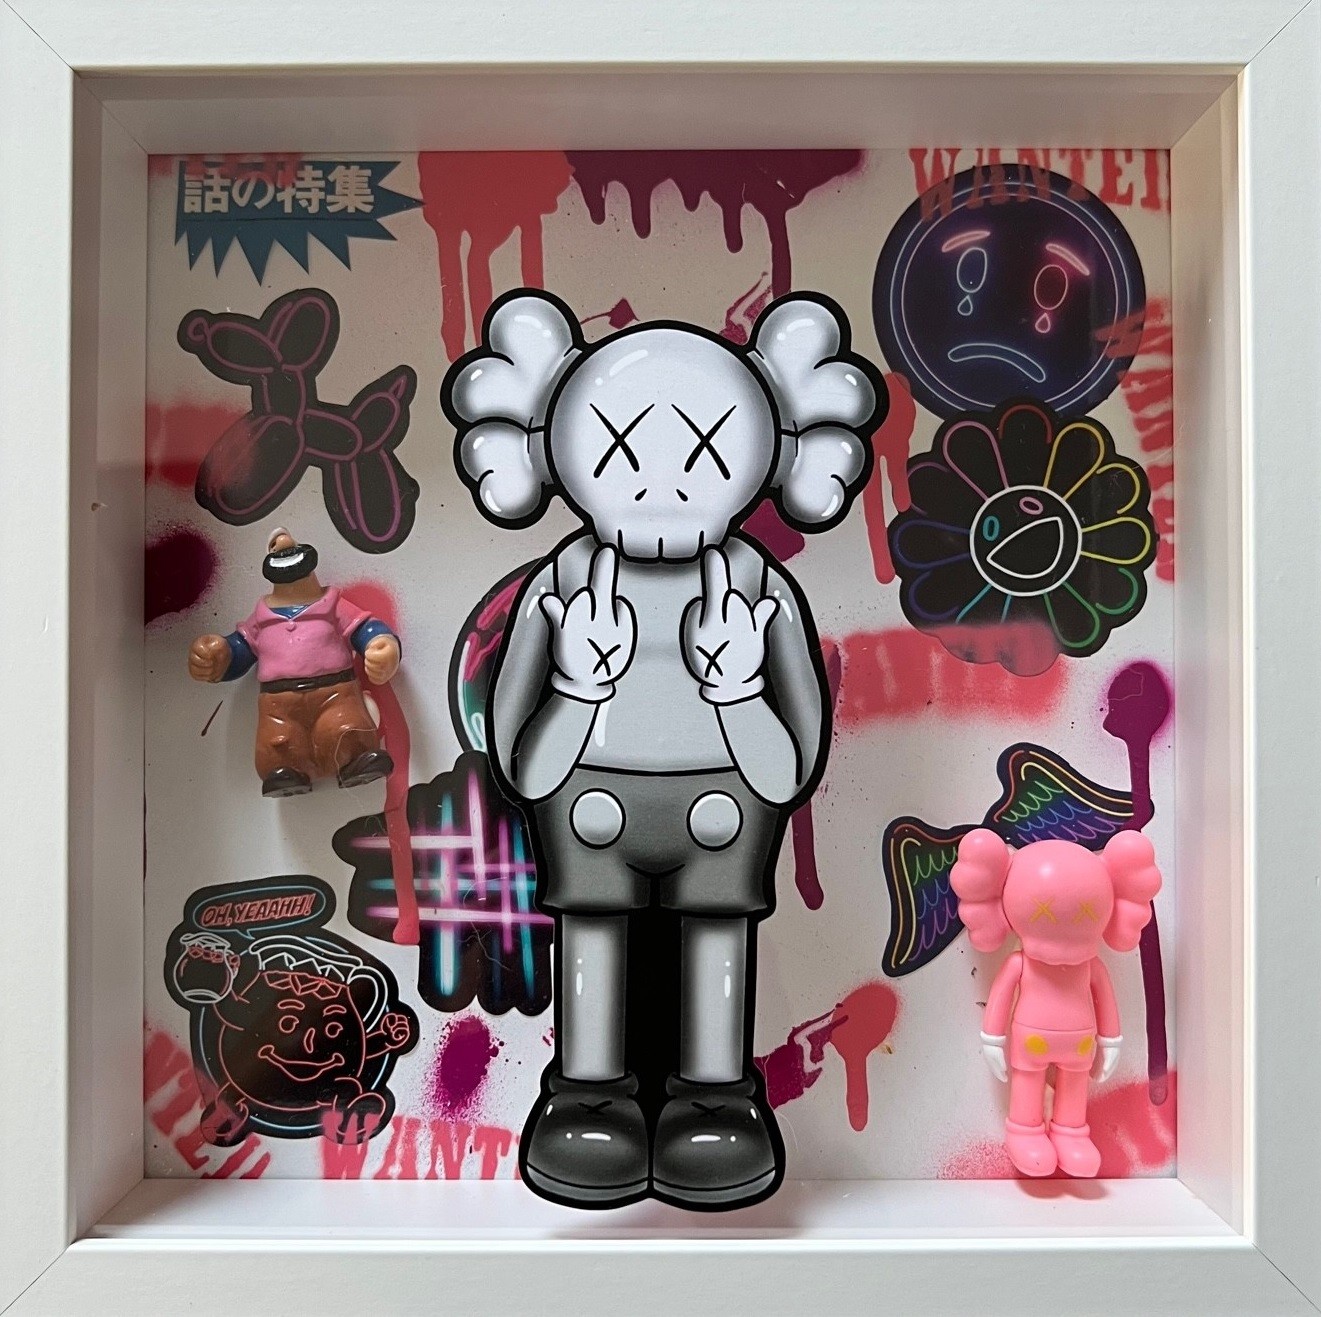 Seeing (Pink), 2019 by KAWS